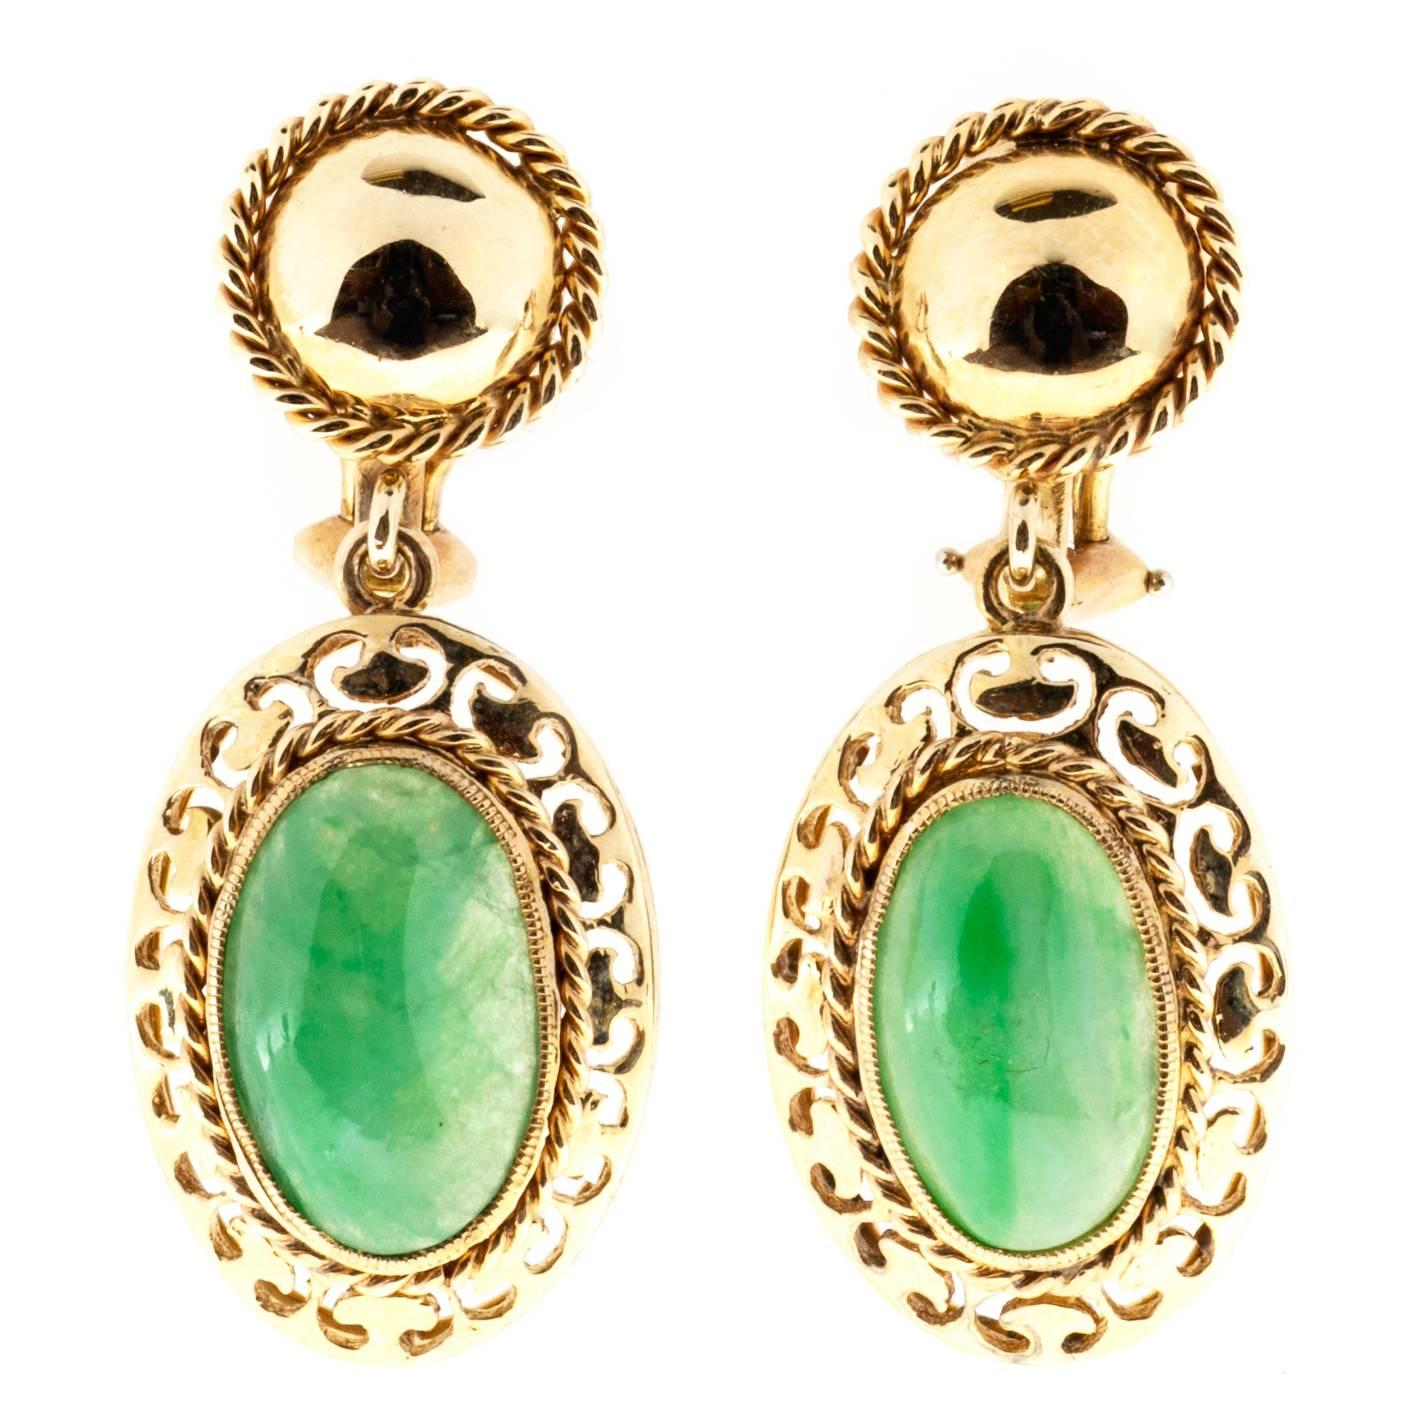 1940's Jadeite jade 14k yellow gold dangle earrings. Clip and post style. The bottom dangle holds 